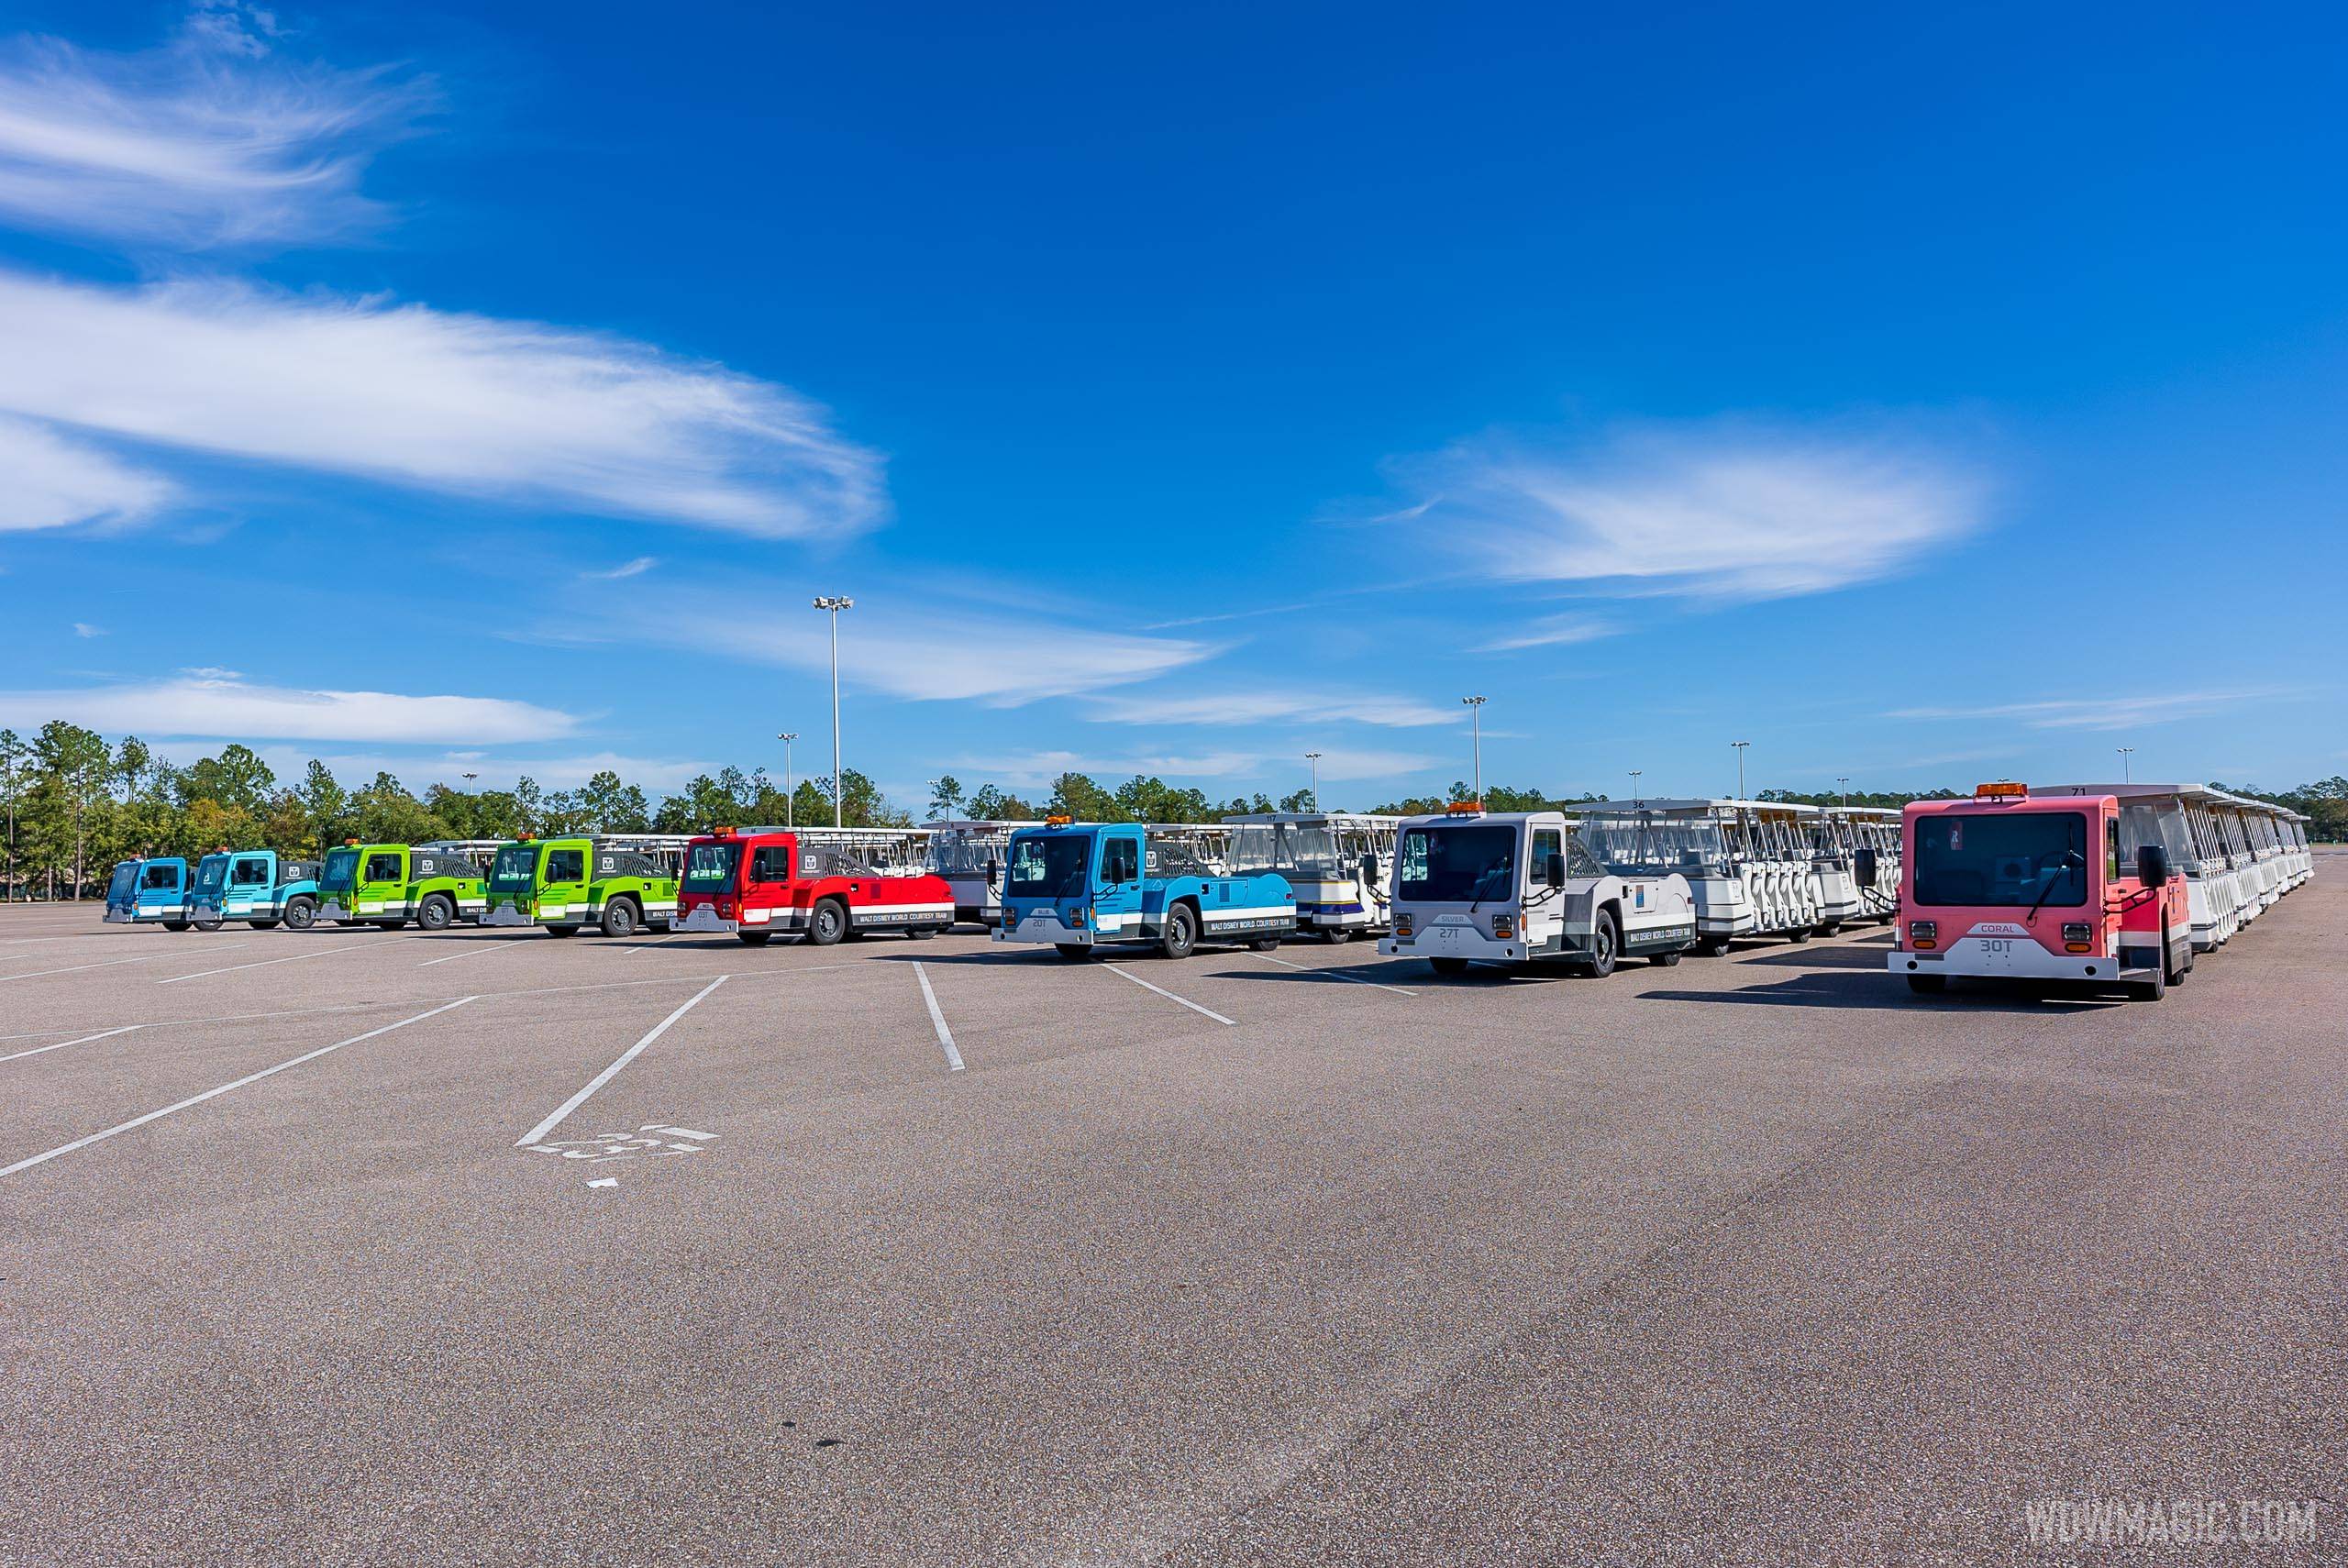 Parking trams remain out of service at Walt Disney World's theme parks